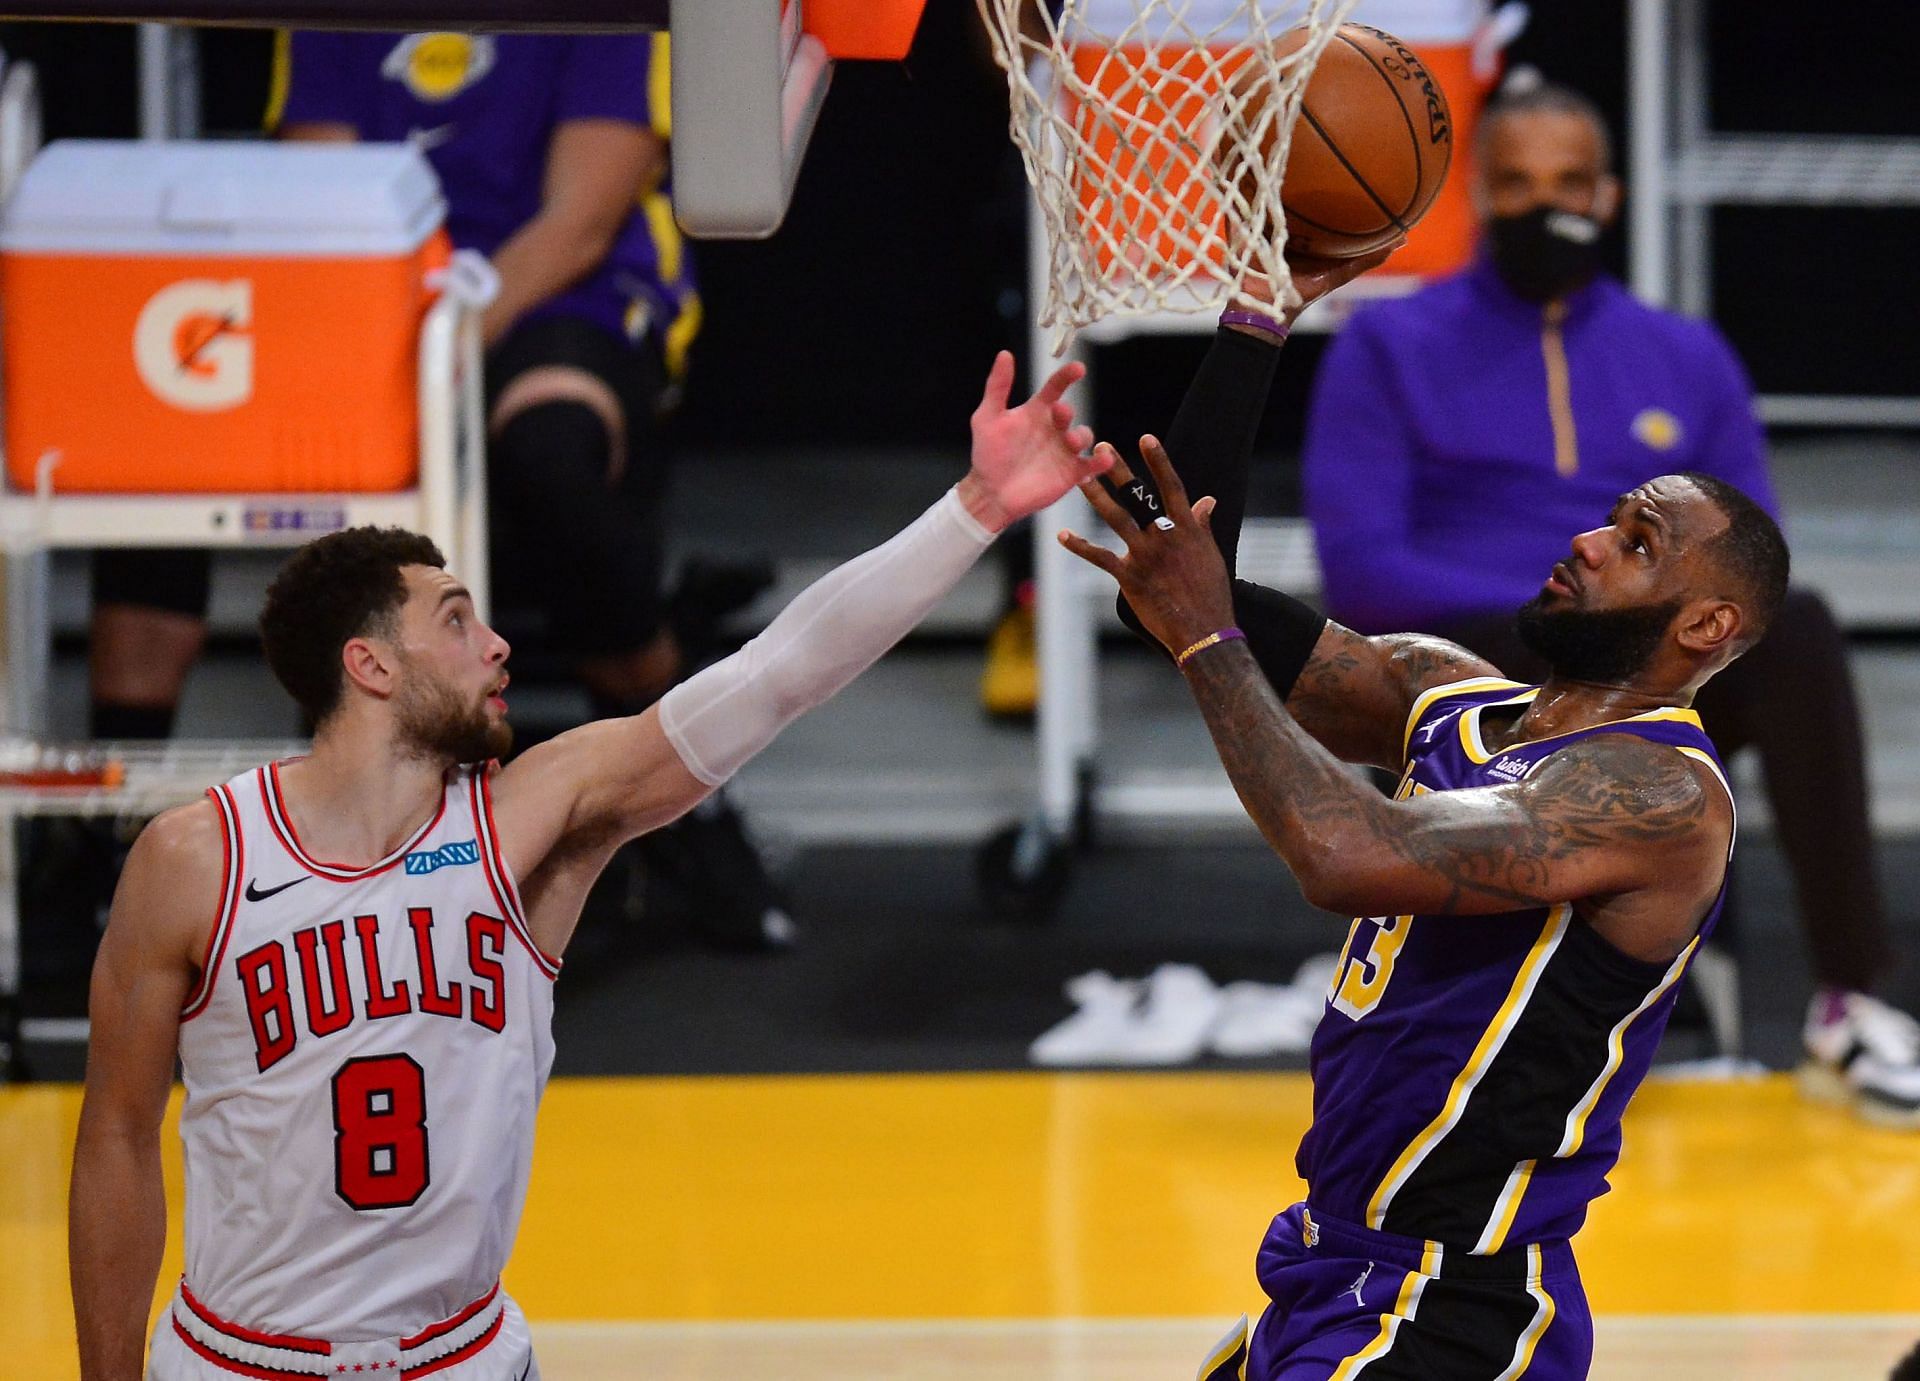 The Chicago Bulls are looking to sweep the visiting LA Lakers in their season series when they meet again on Sunday.